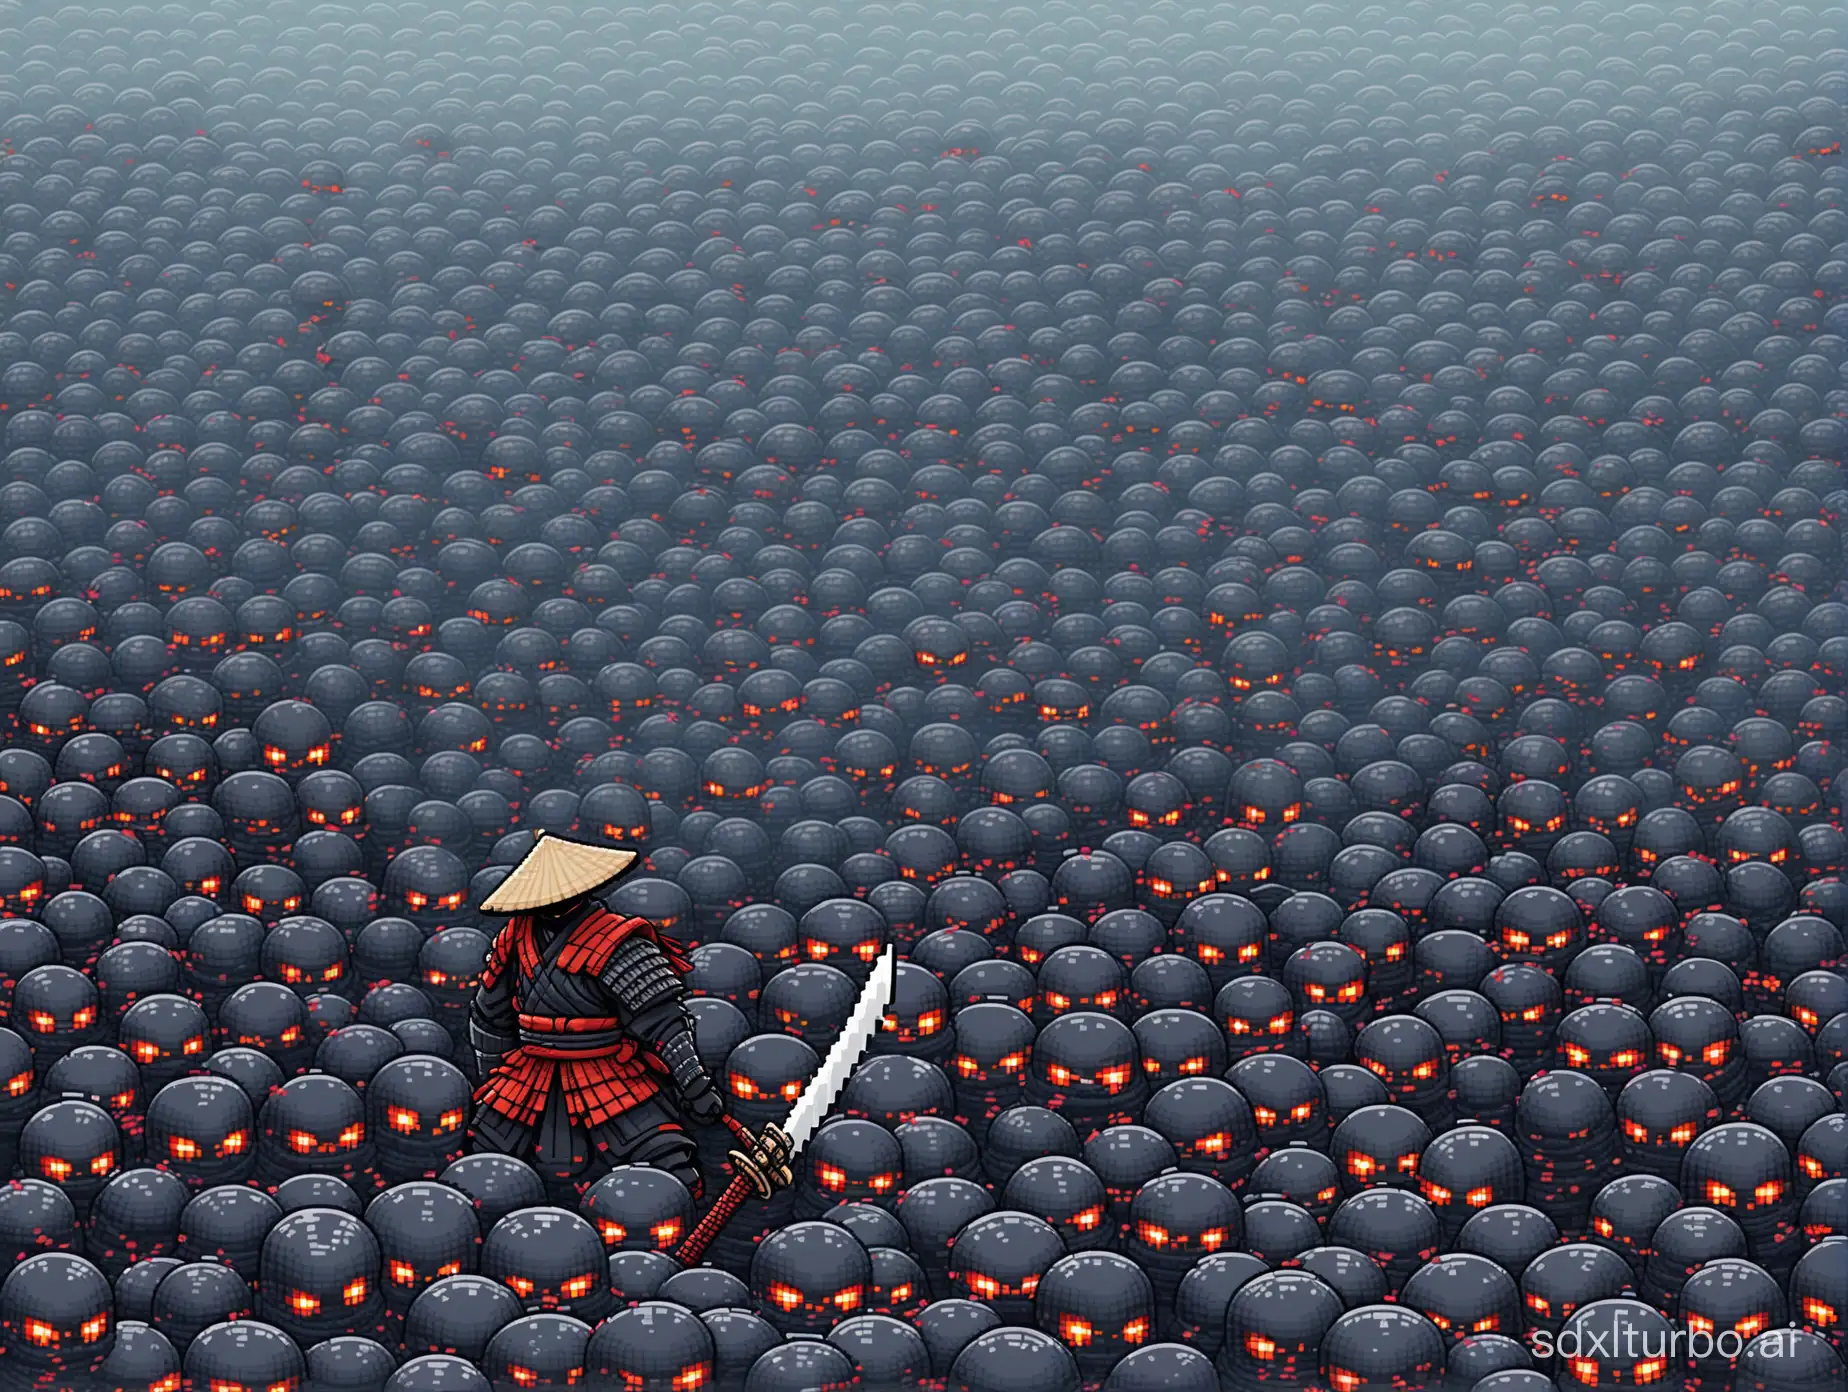 A pixelated ronin with a conical hat and a samurai sword battles swarms of black slimes.